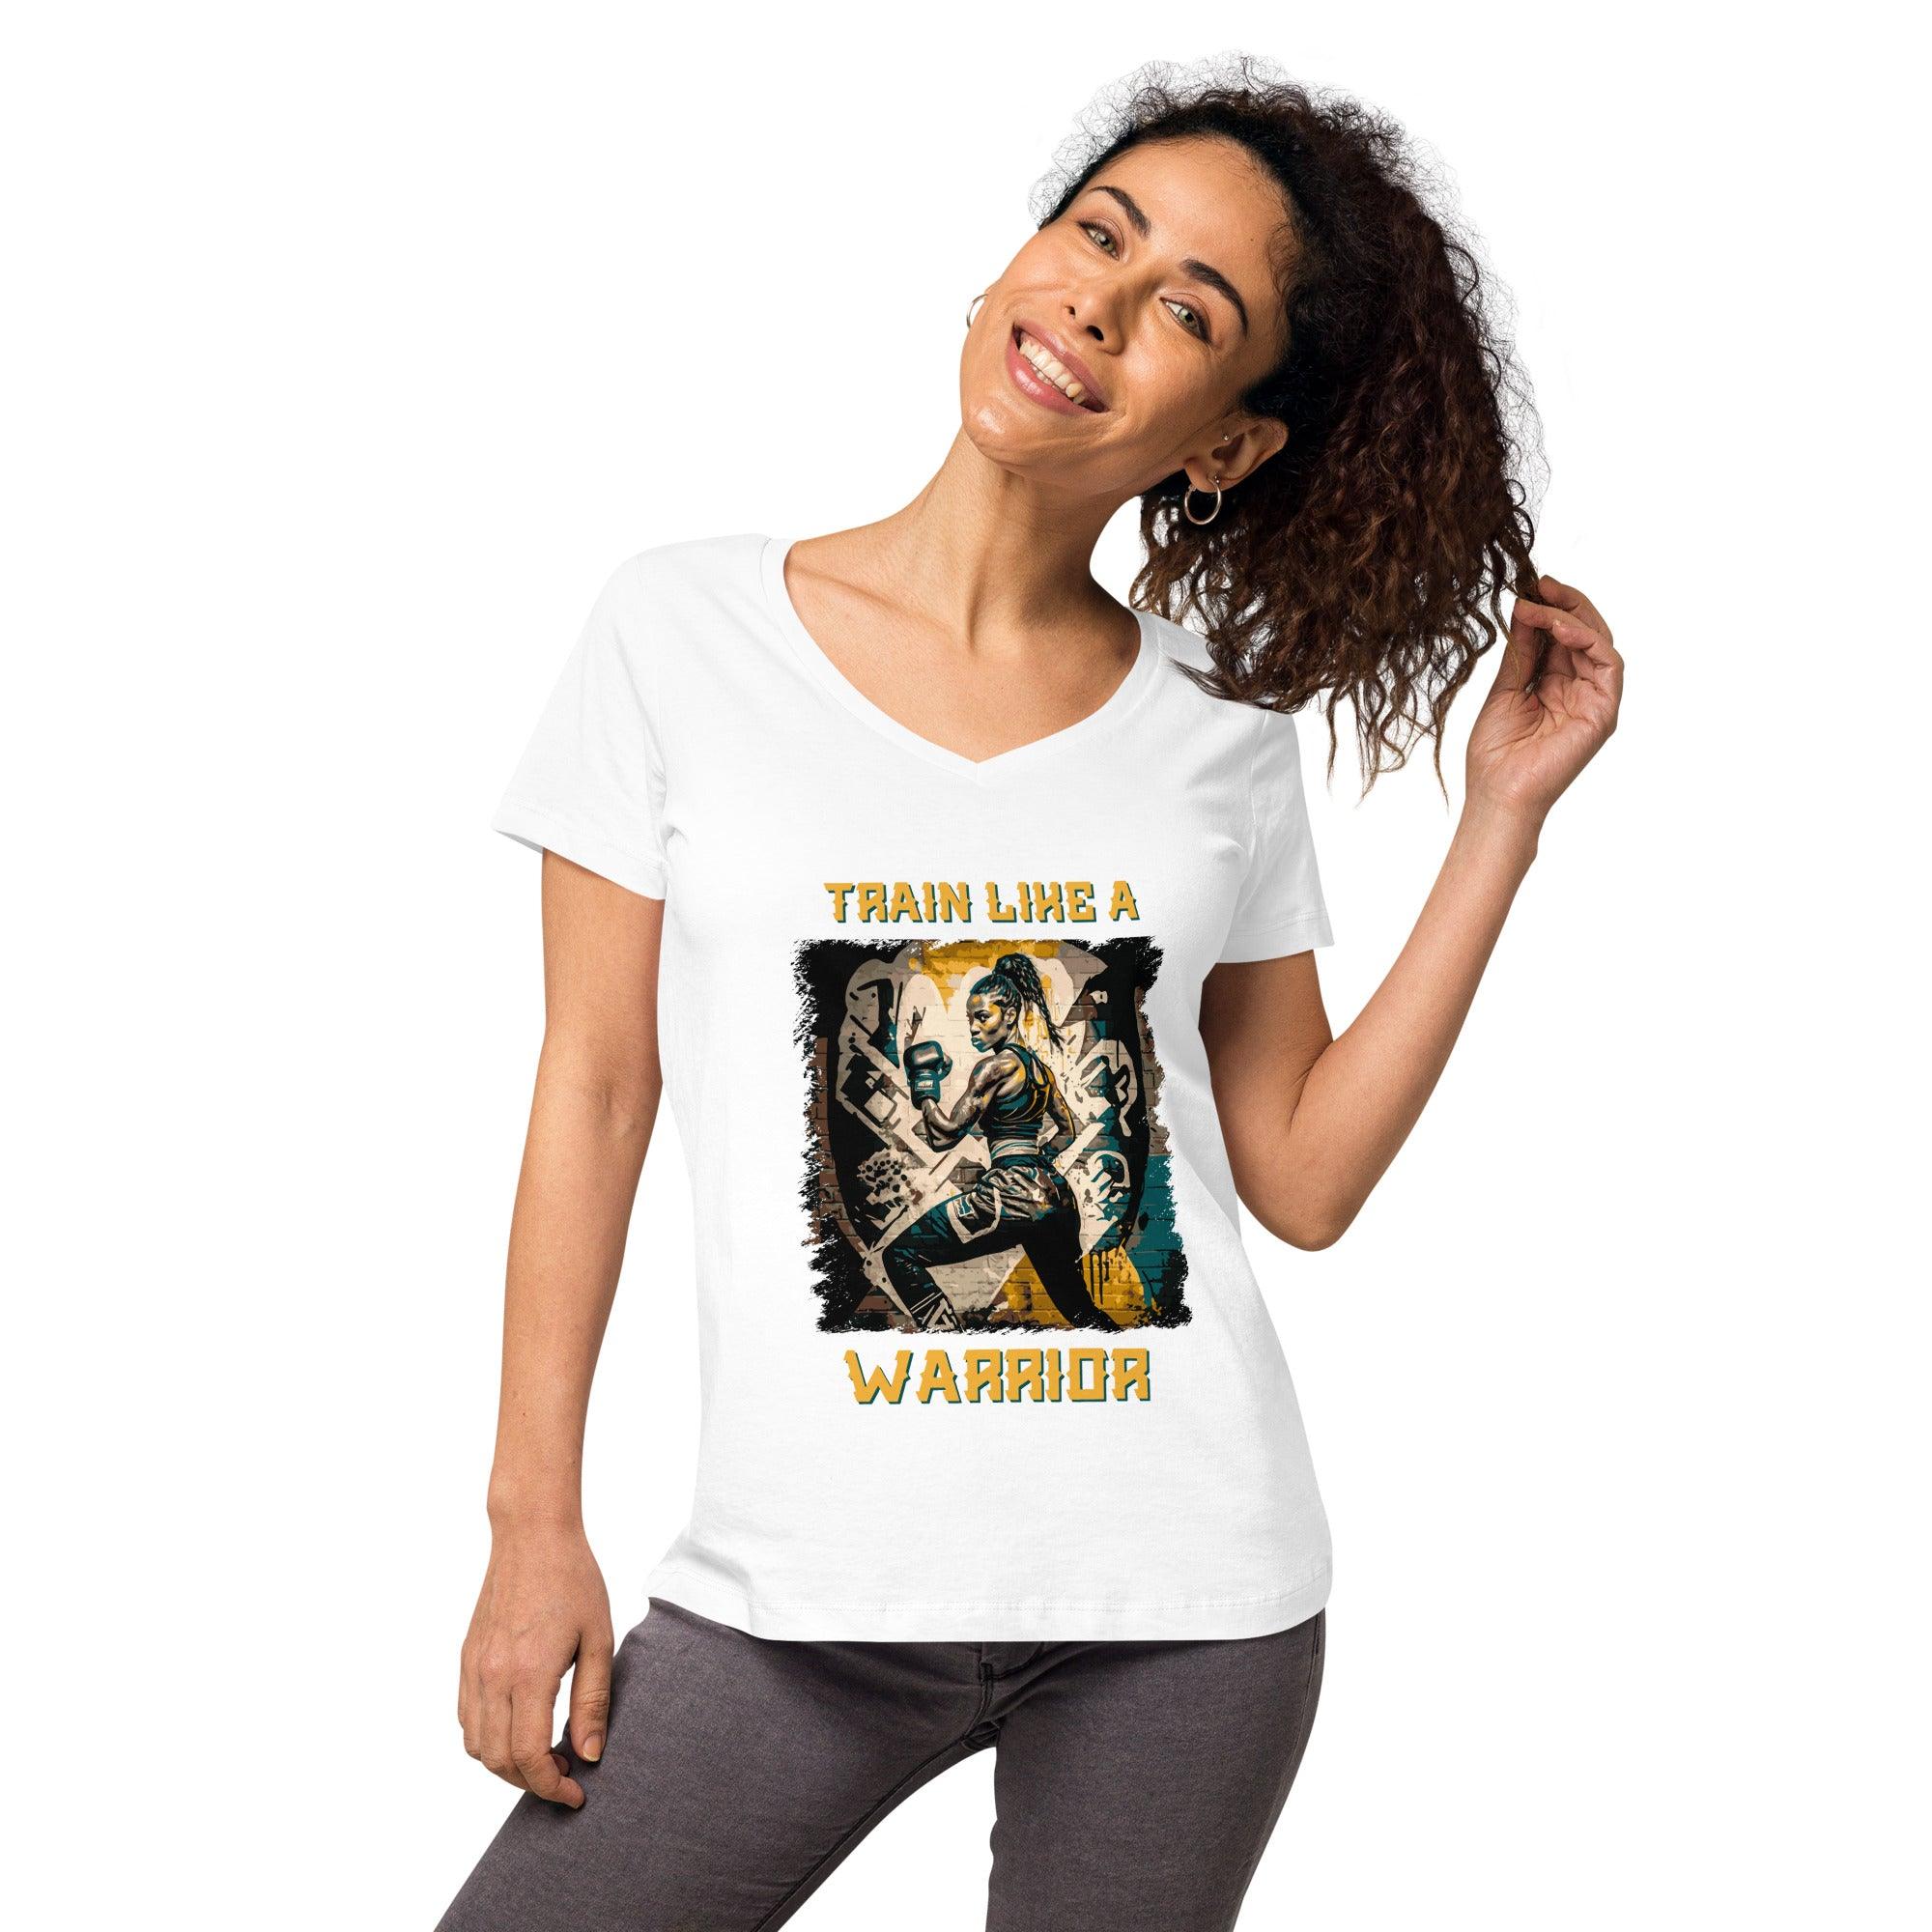 Train Like A Warrior Women’s Fitted V-neck T-shirt - Beyond T-shirts